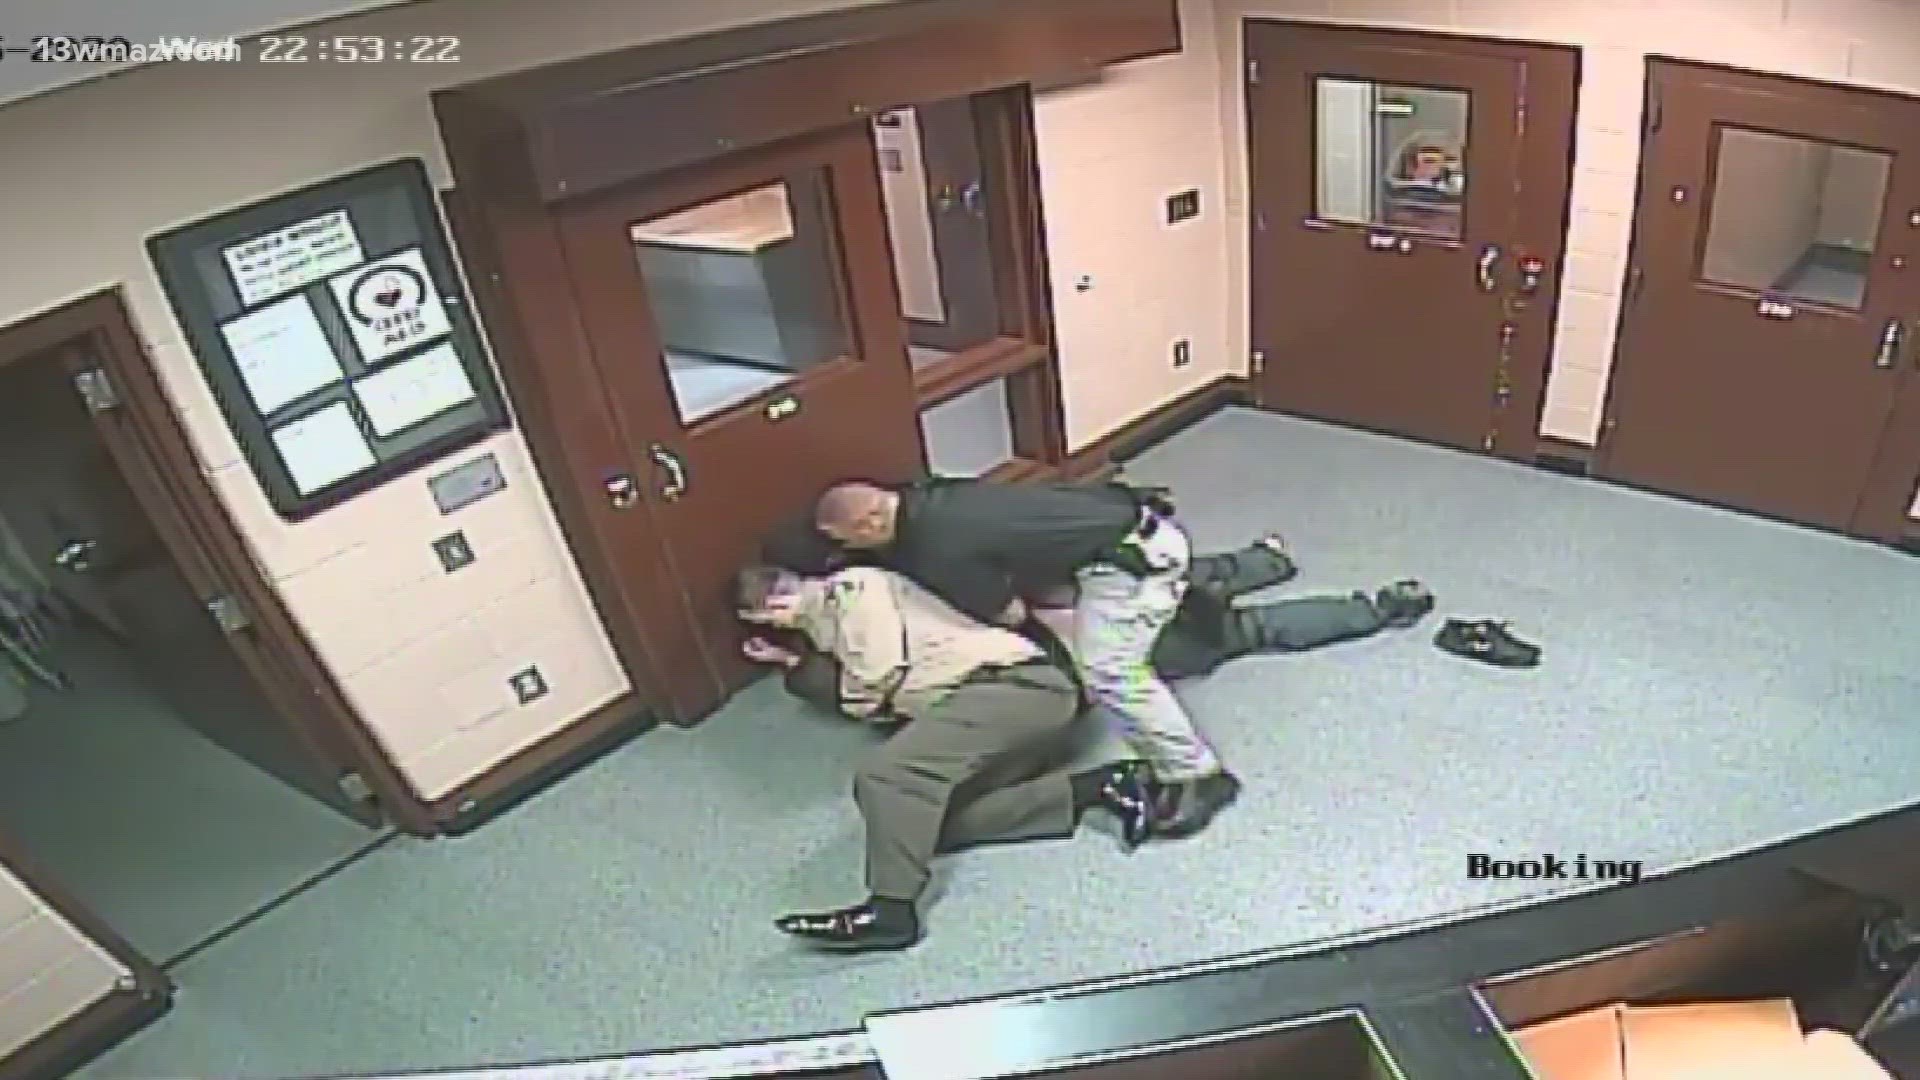 Video shows deputies holding Marshall in a chokehold for 1 minute and 35 seconds. The GBI report says Marshall died by homicide during a physical altercation.